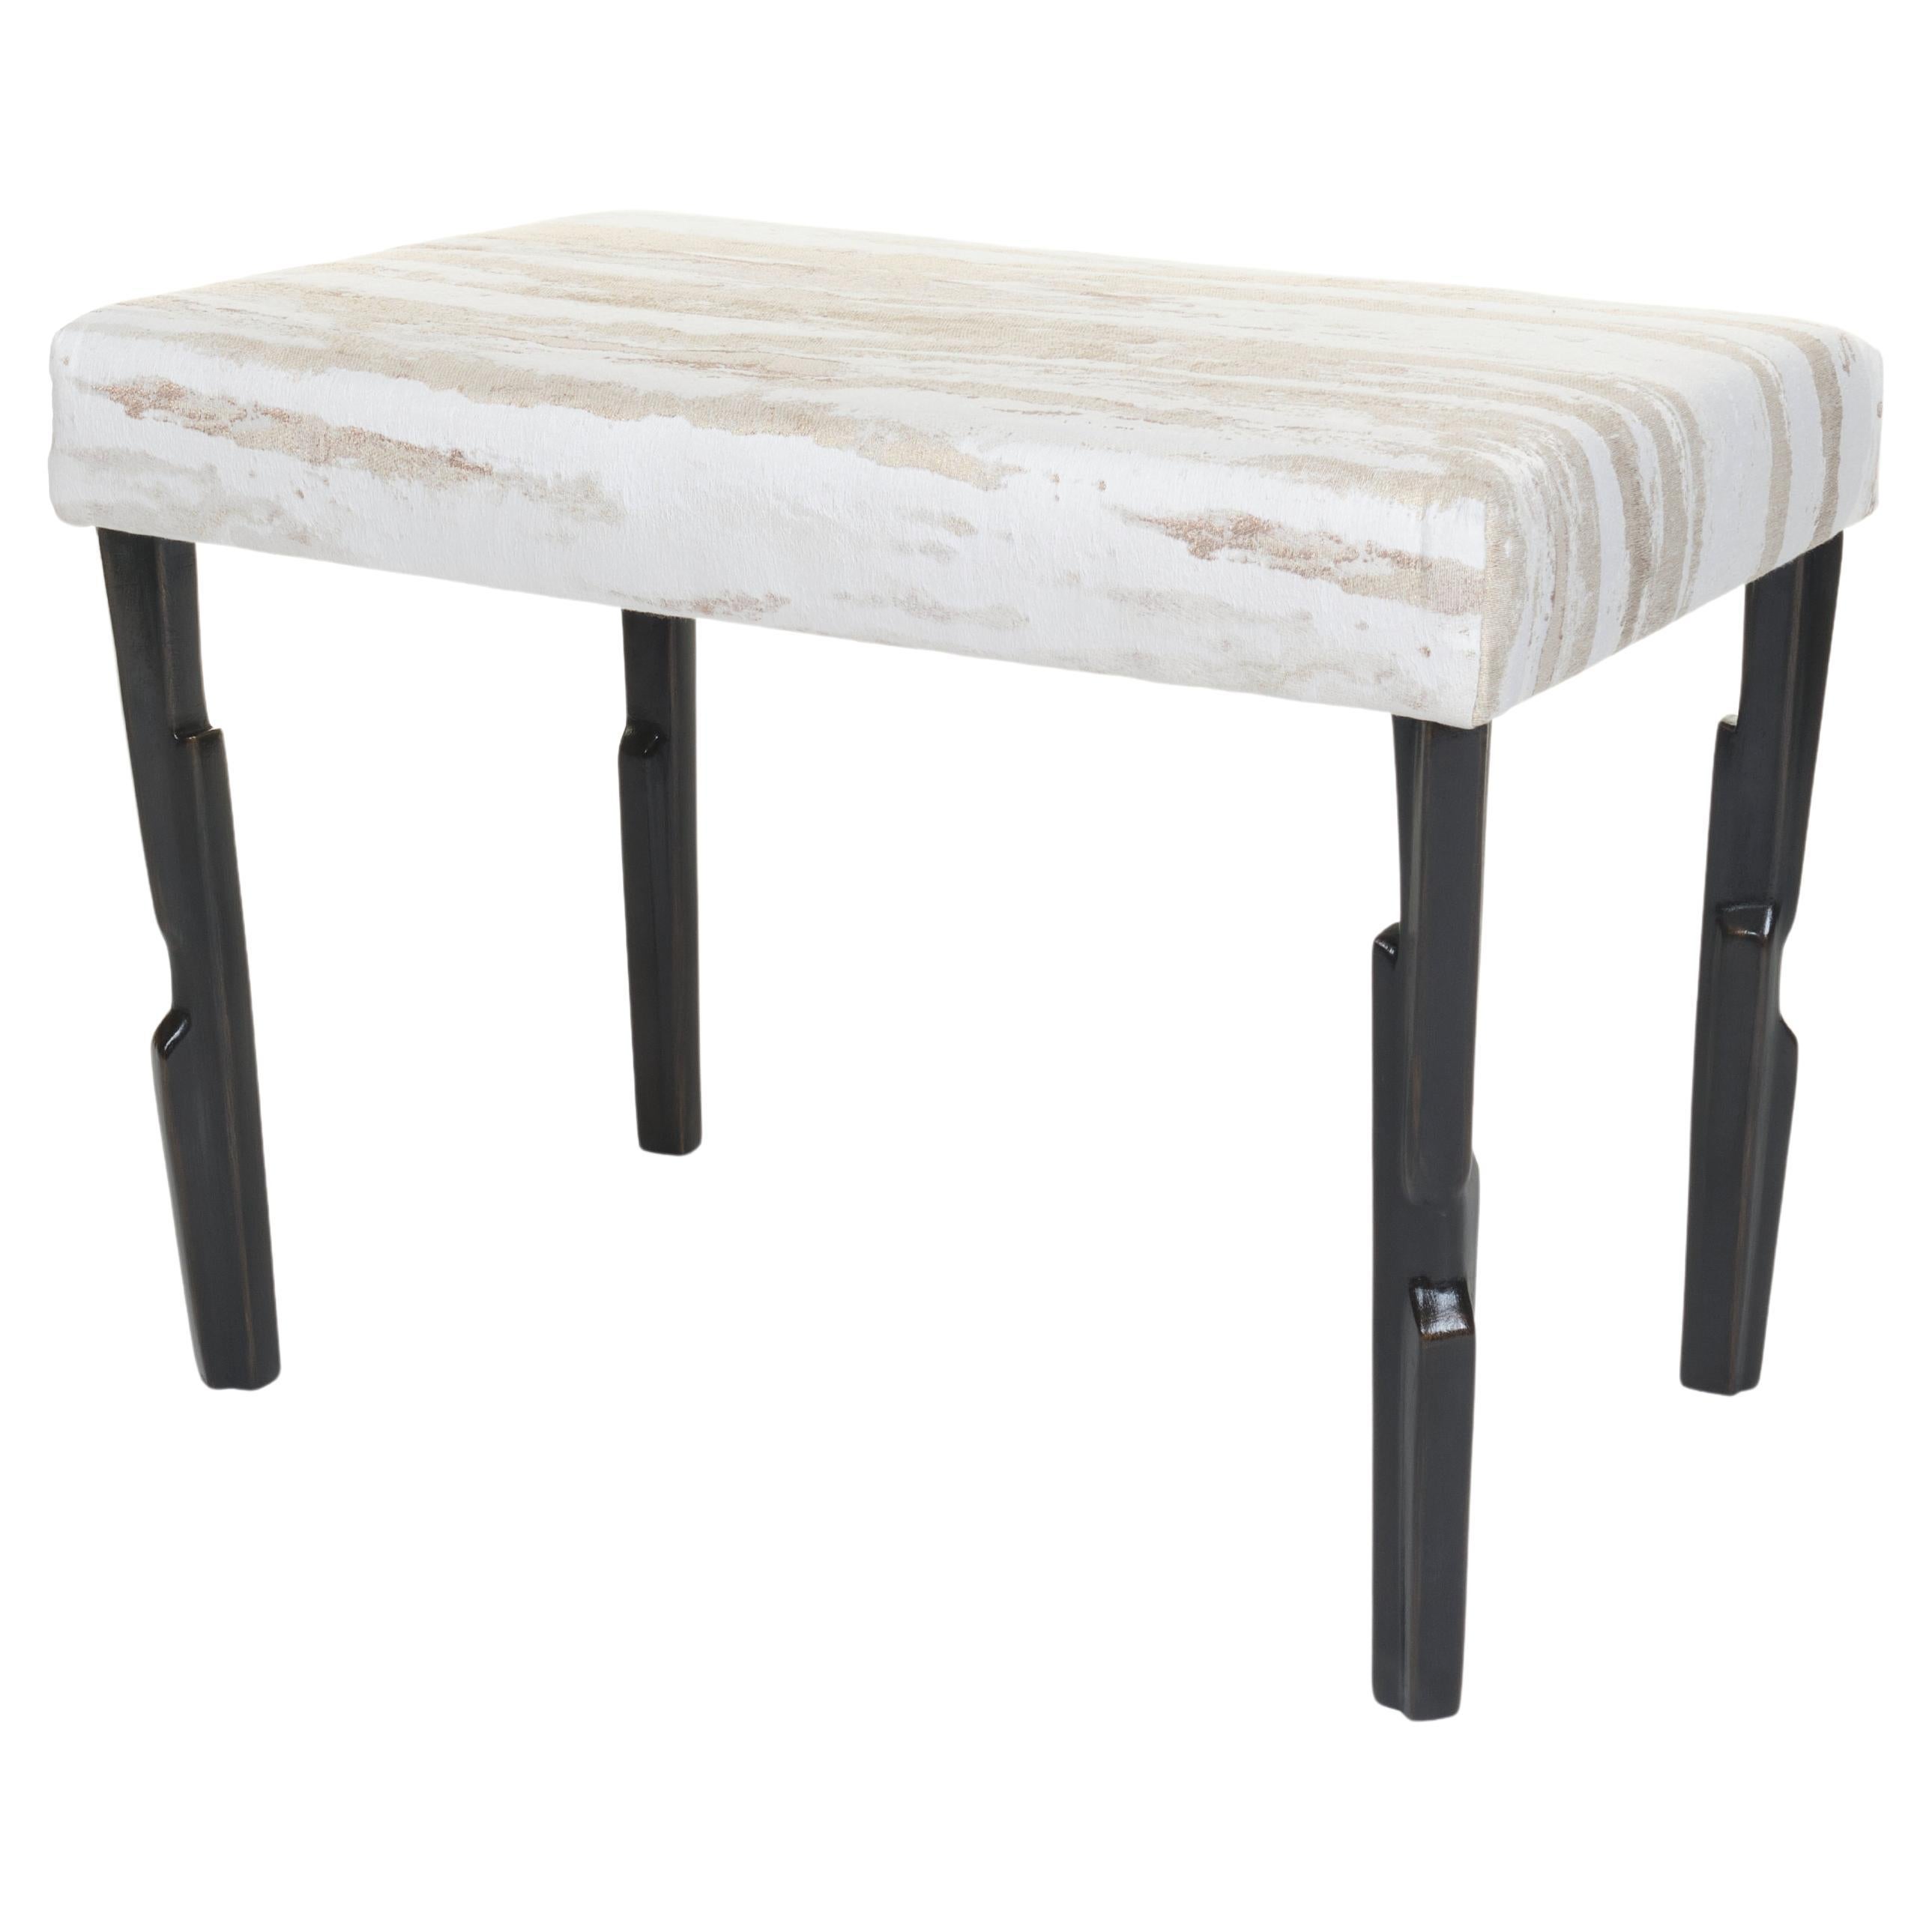 Modern Linea Stool No.1, Bronze Plaster Finish with Second Firing 2 seat pad